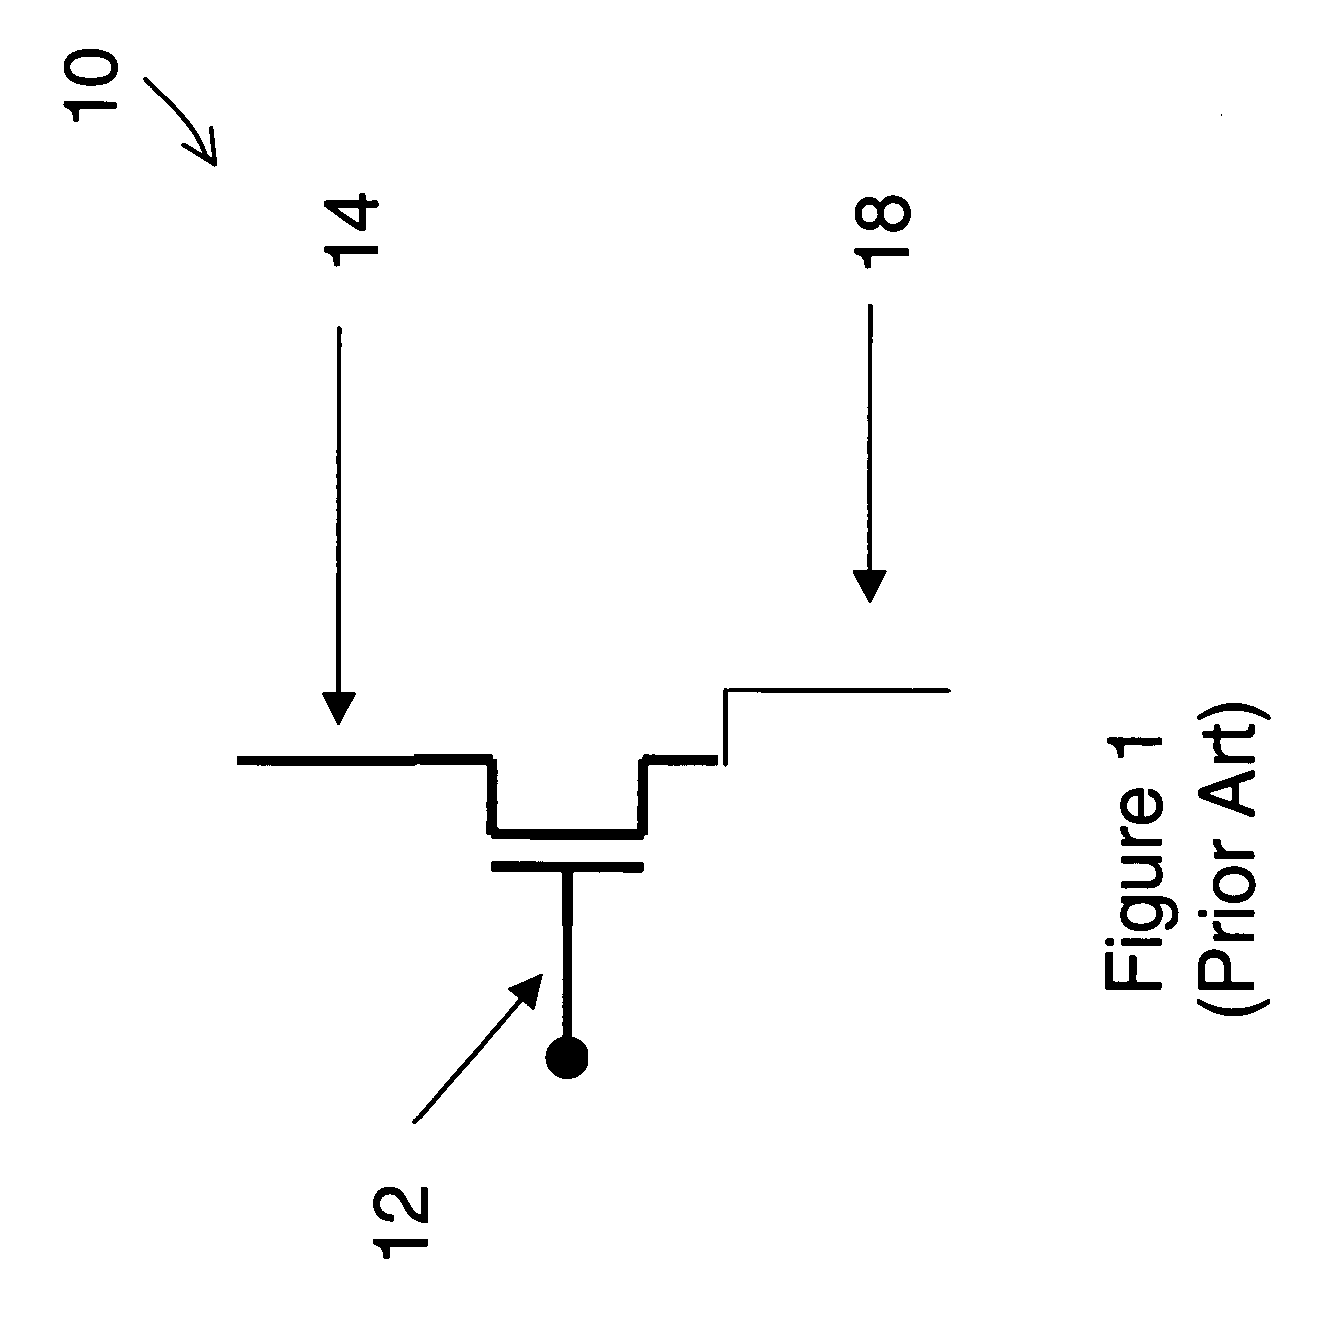 Field effect devices having a source controlled via a nanotube switching element